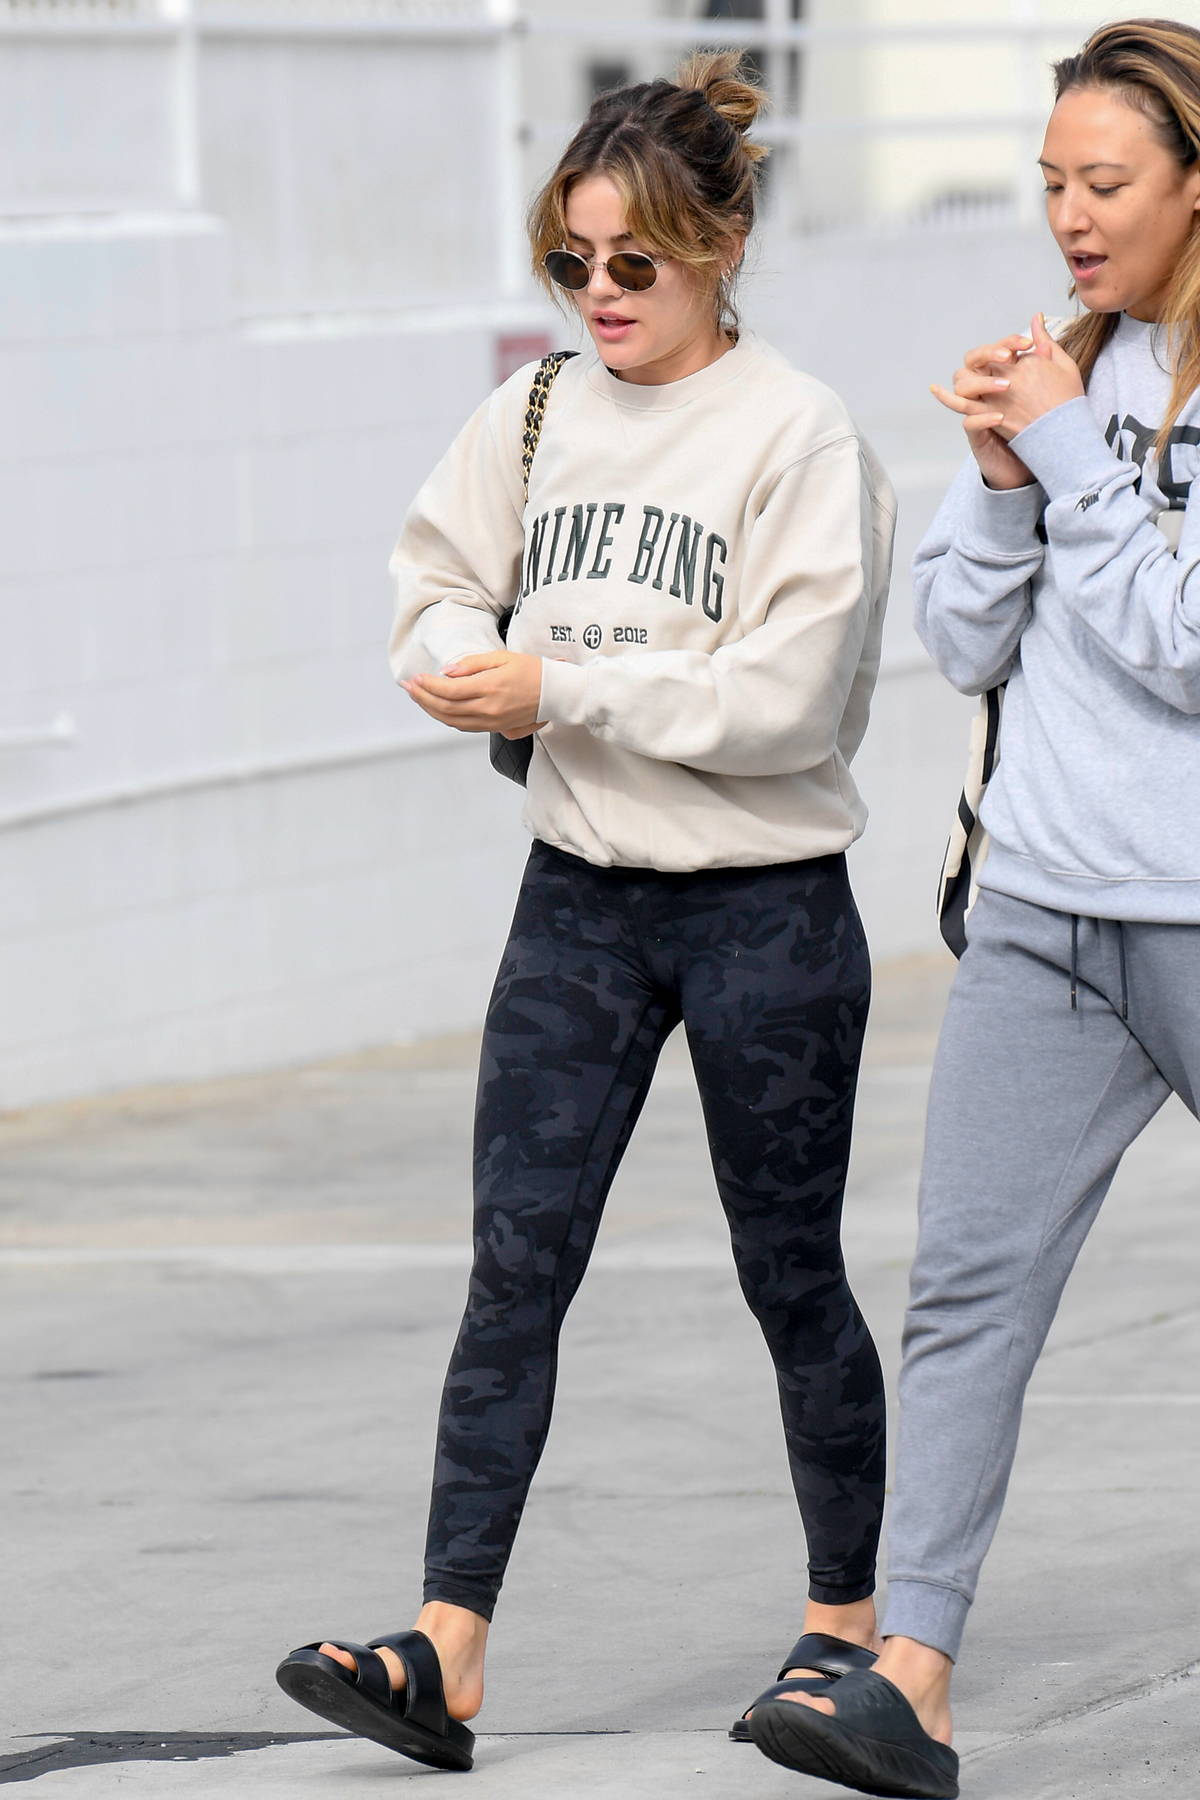 https://www.celebsfirst.com/wp-content/uploads/2022/04/lucy-hale-sports-a-sweatshirt-with-black-camo-leggings-while-visiting-a-spa-with-a-friend-in-los-angeles-030422_2.jpg